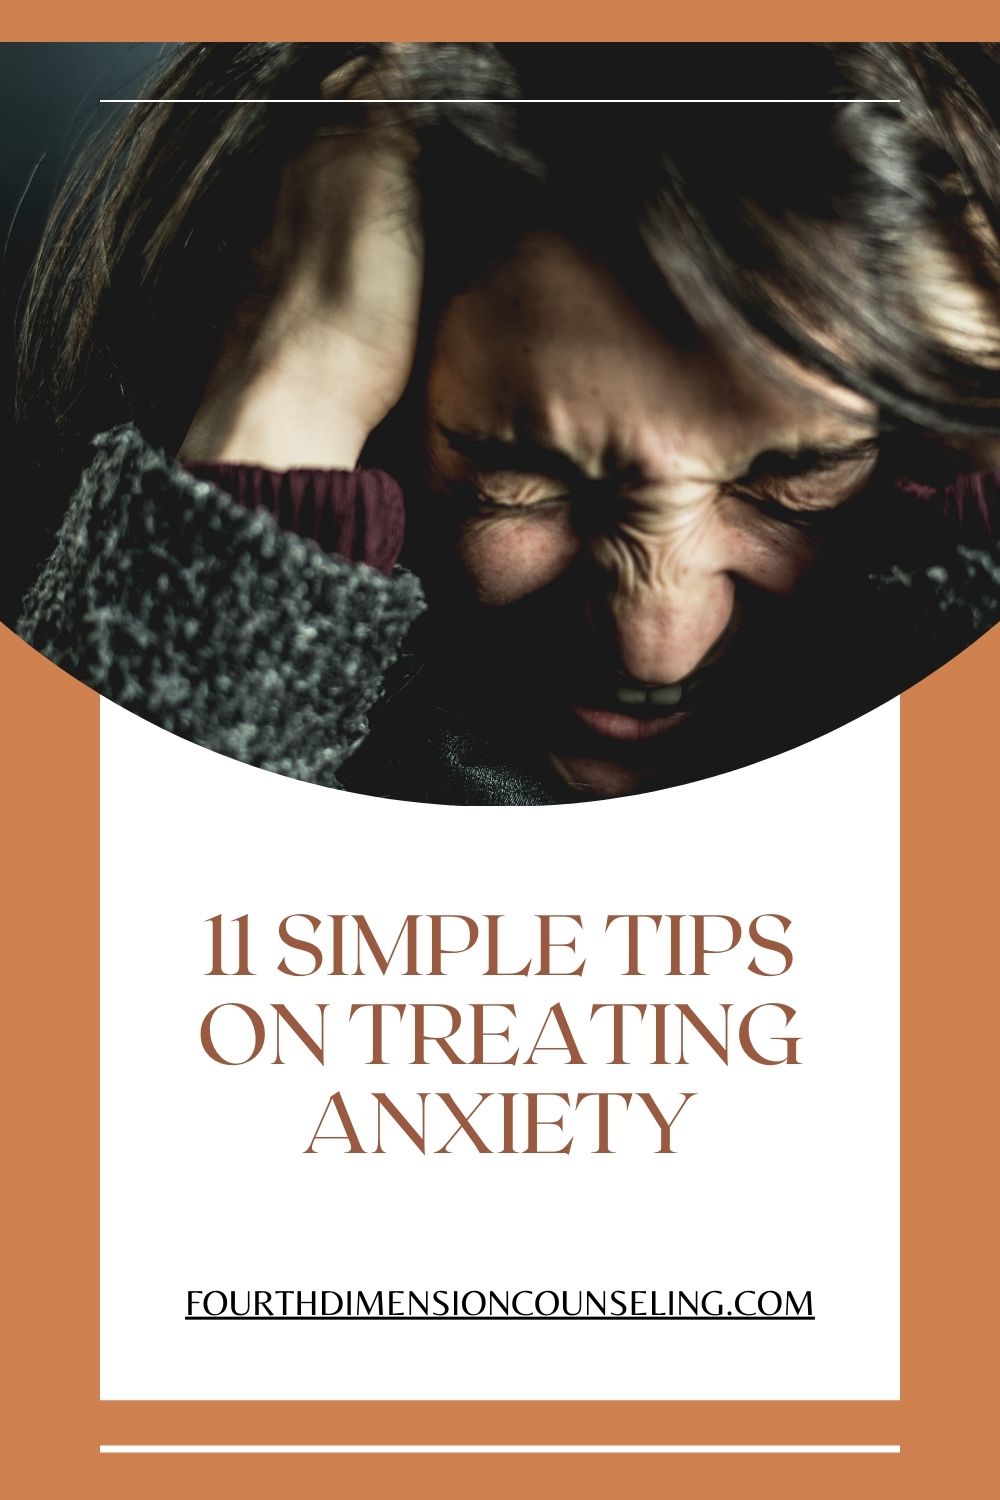 11 Simple Tips on Treating Anxiety